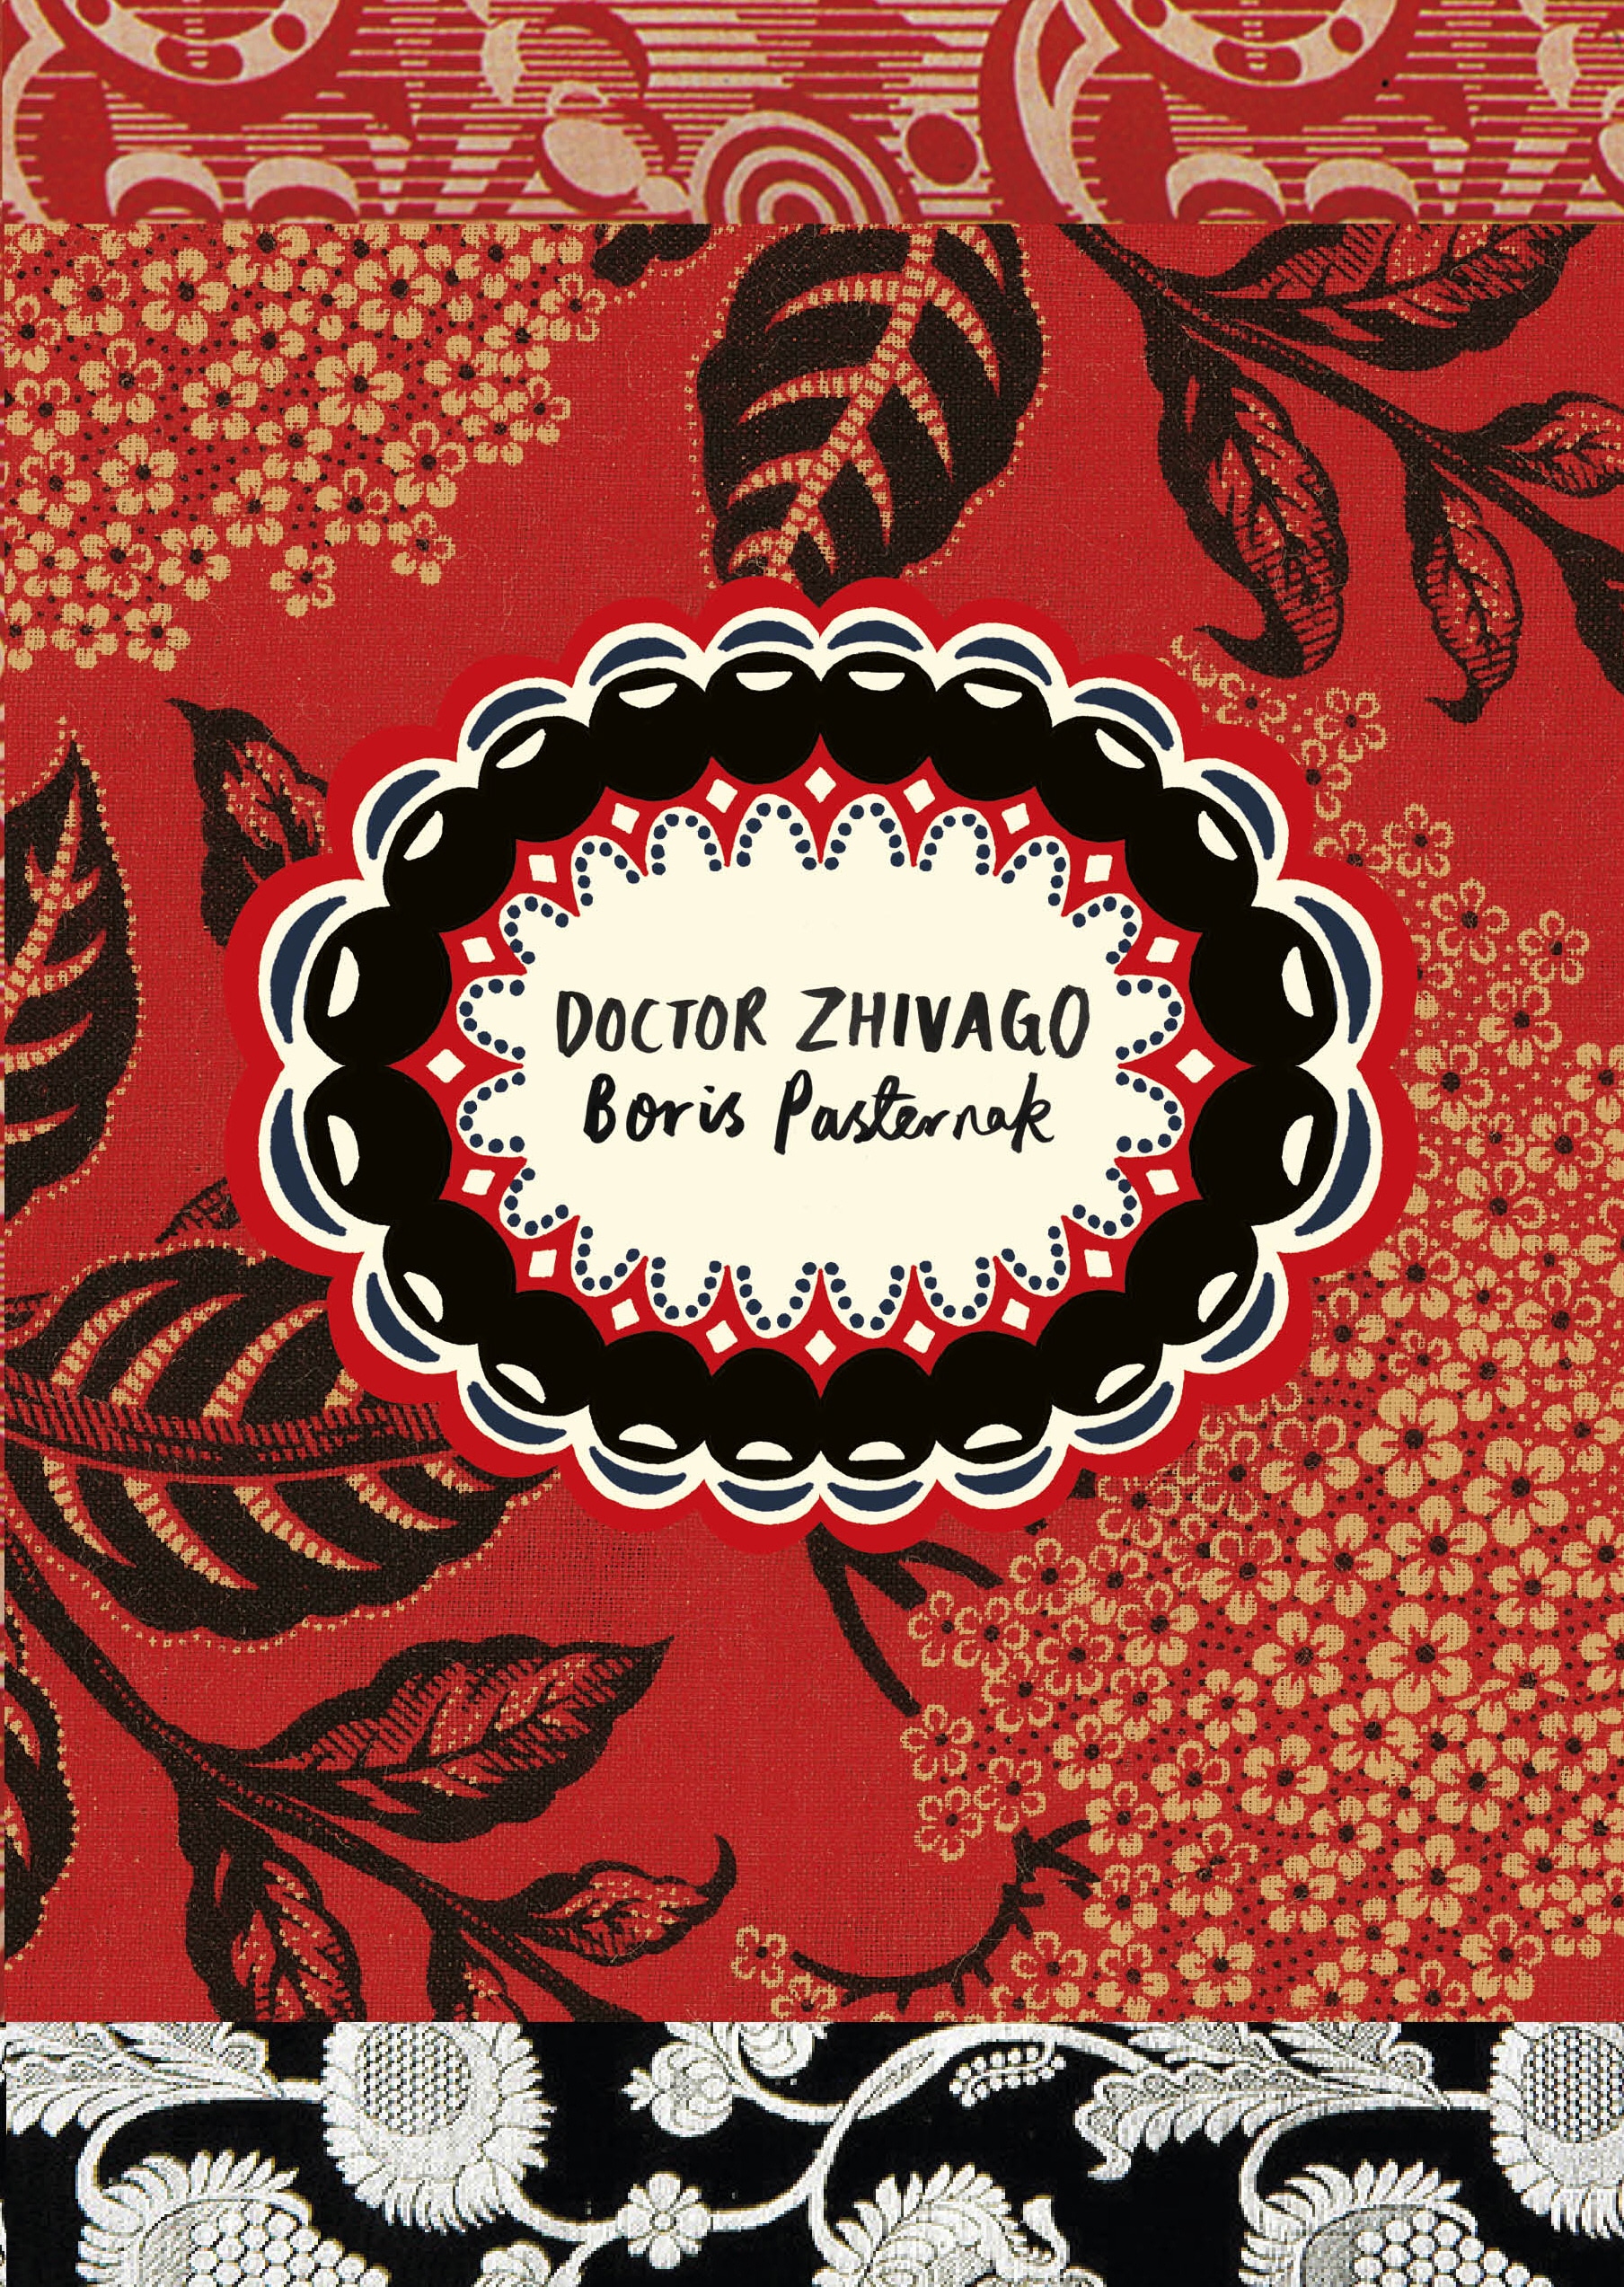 Book “Doctor Zhivago (Vintage Classic Russians Series)” by Boris Pasternak — January 5, 2017